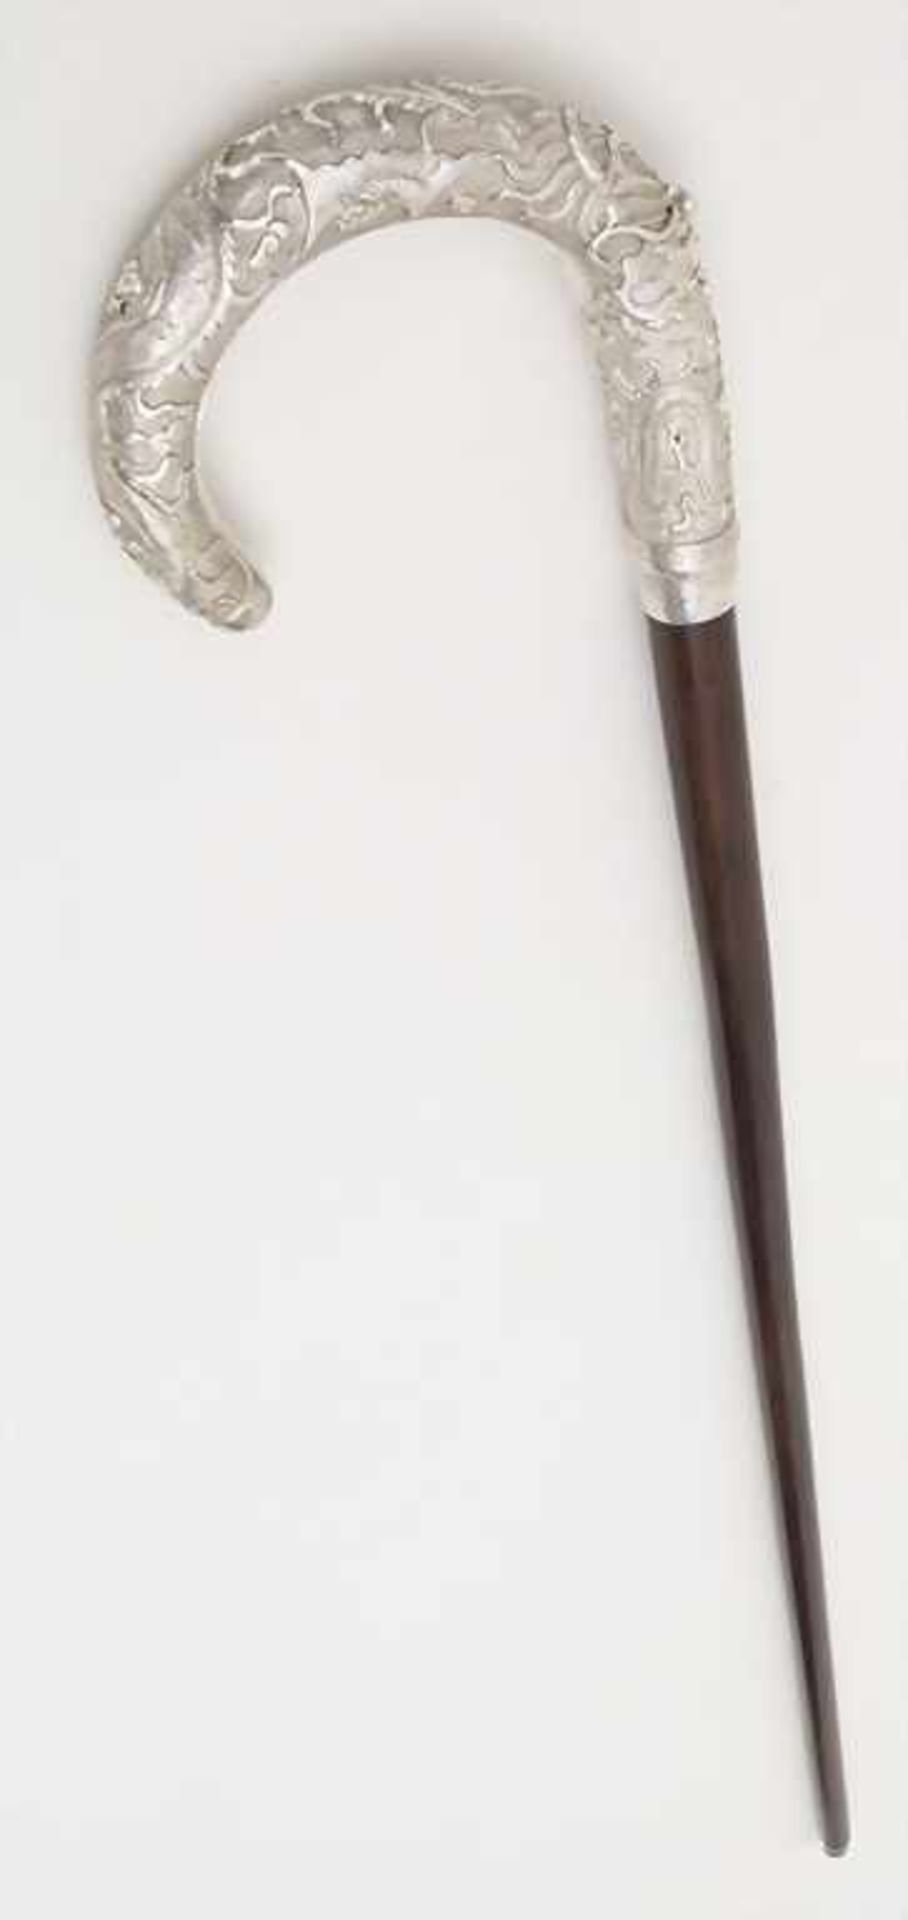 Gehstock mit Drachenmotiv / A cane with dragon handle, China (Hong Kong), um 1900Material: Silber